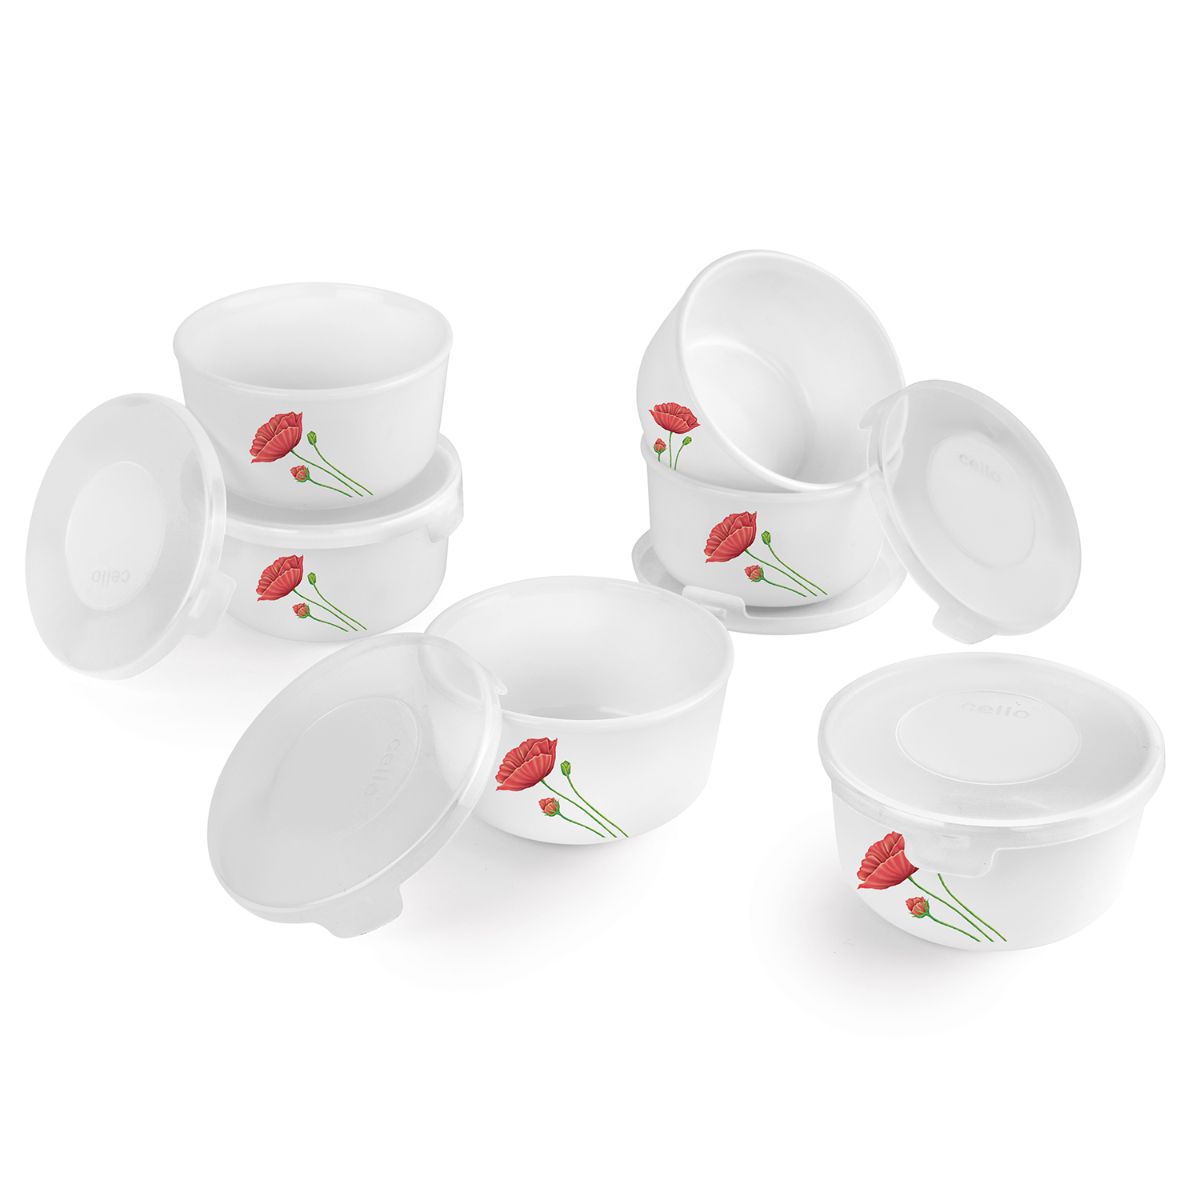 Imperial Series Mini Storage Gift set with lid, 6 Pieces Red Poppy / 6 Pieces